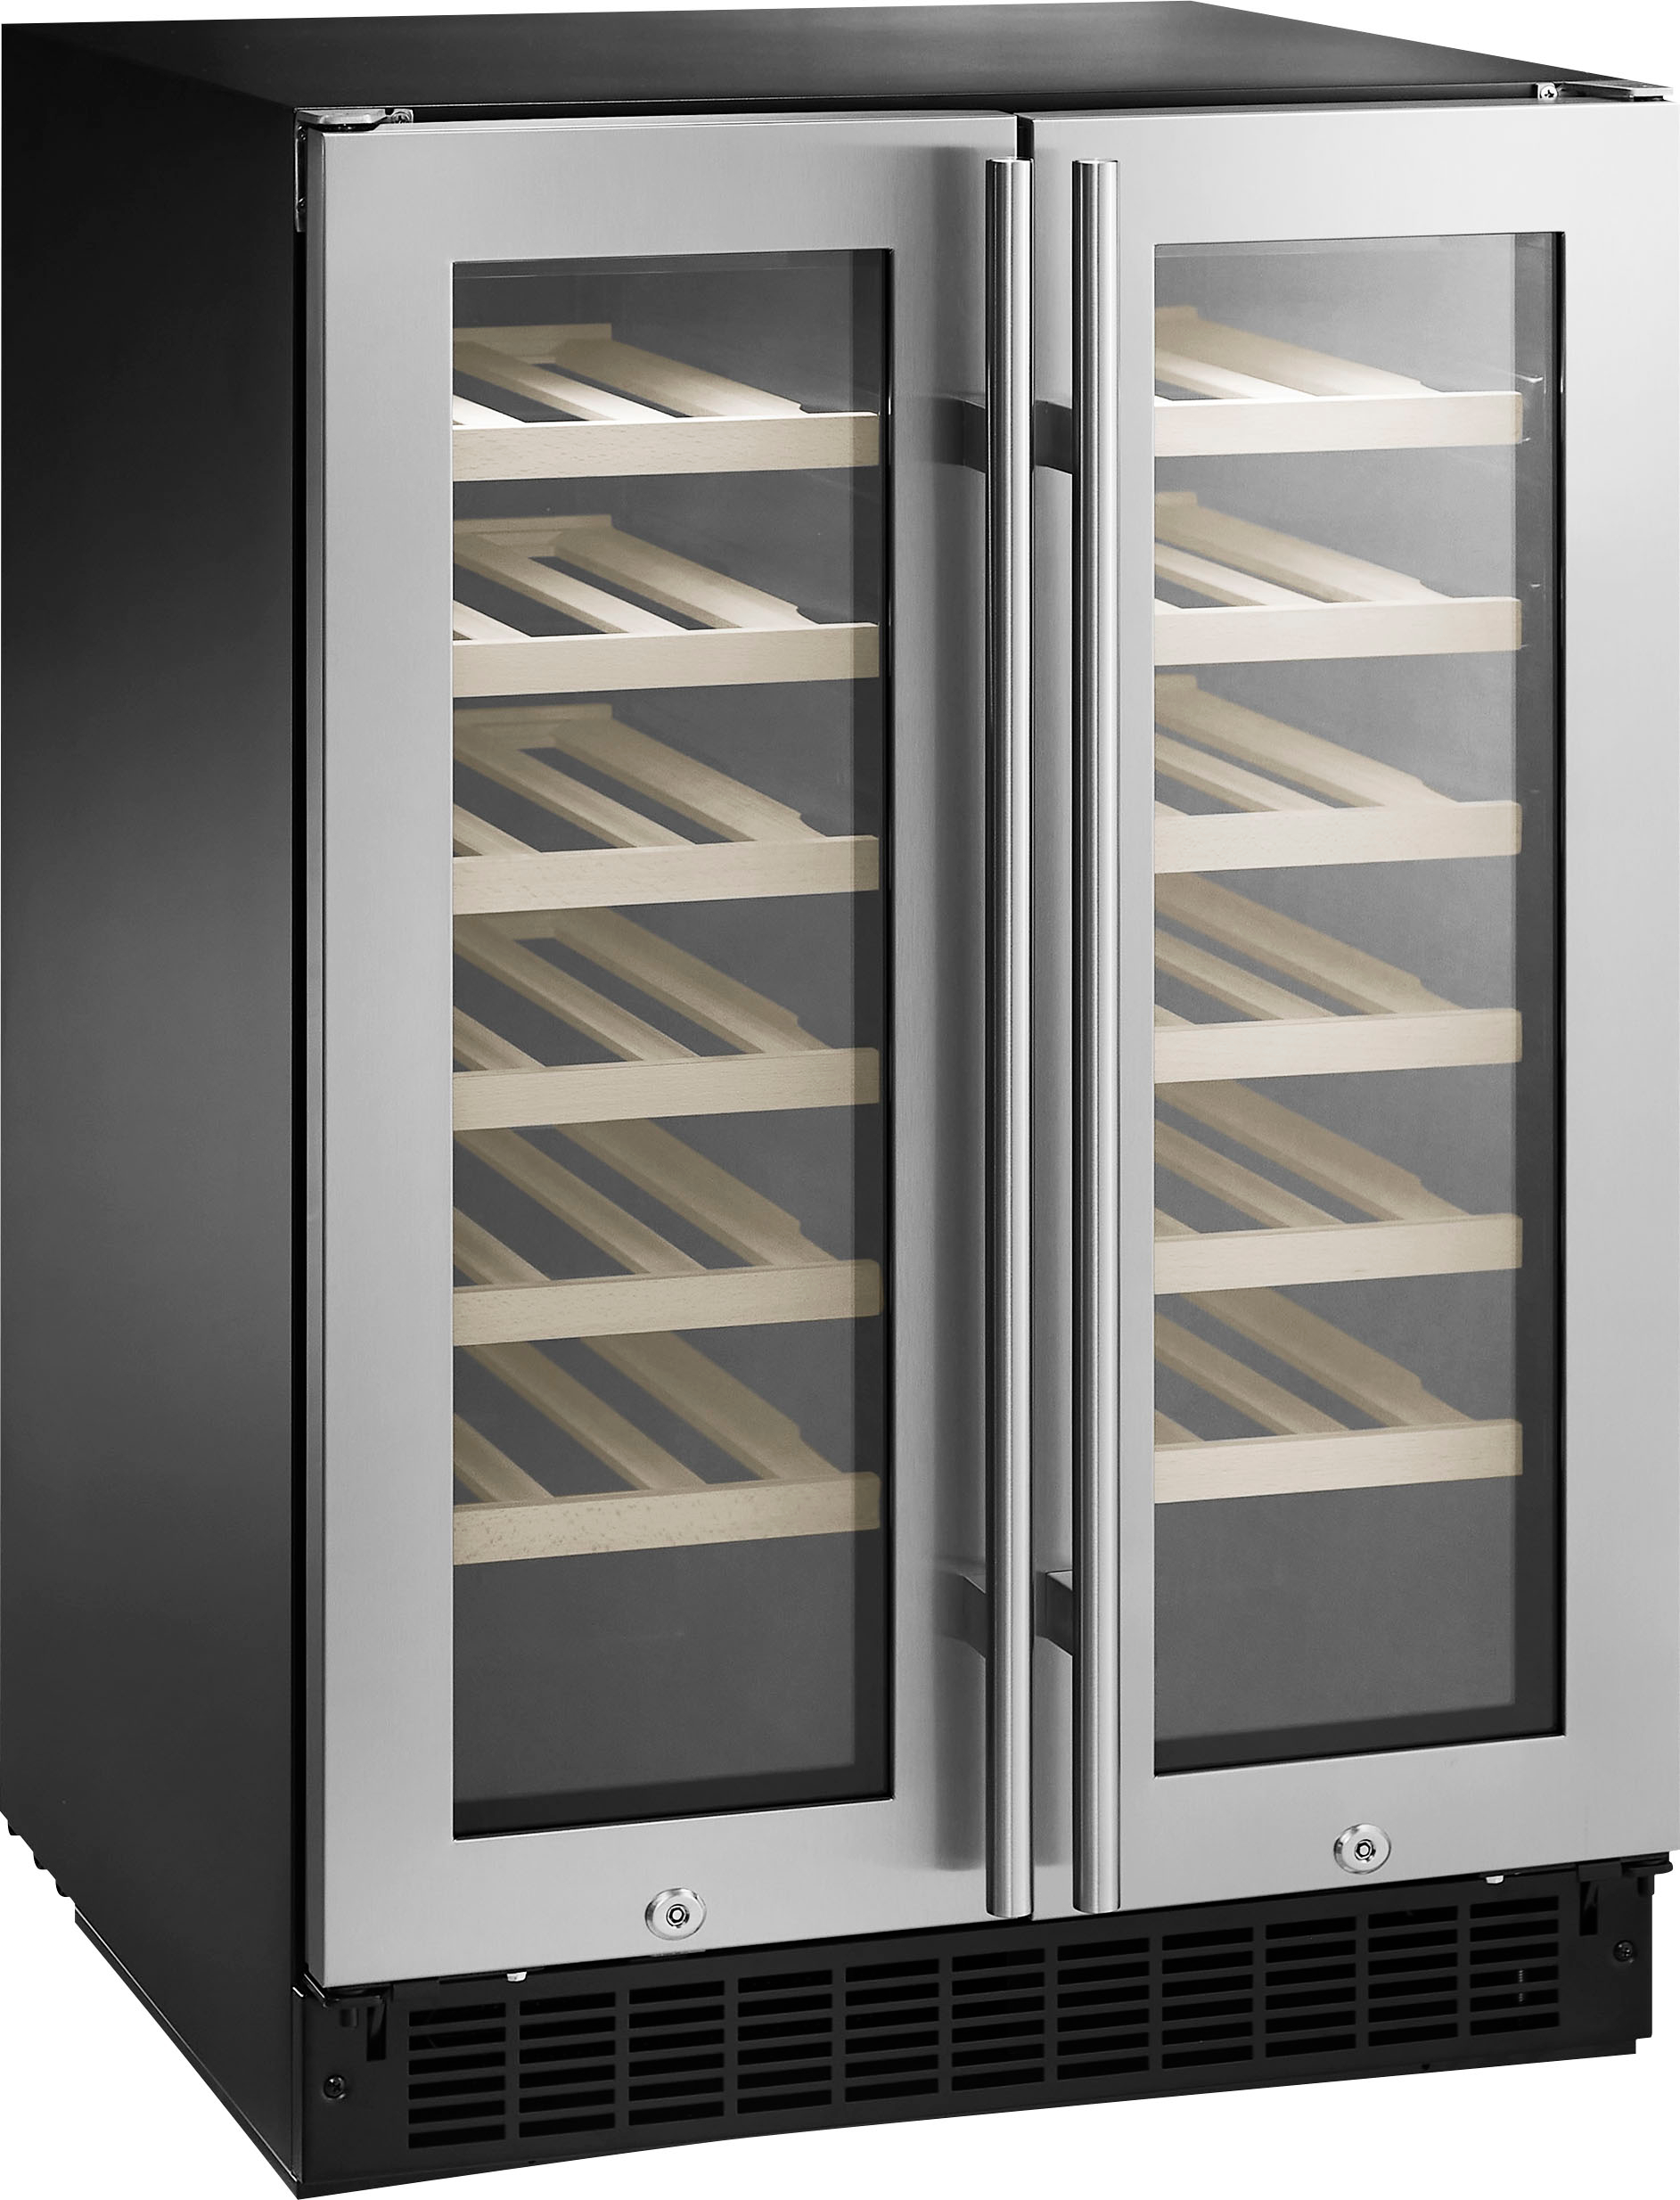 Angle View: Insignia™ - Dual Zone Wine and Beverage Cooler with Glass Doors - Stainless Steel